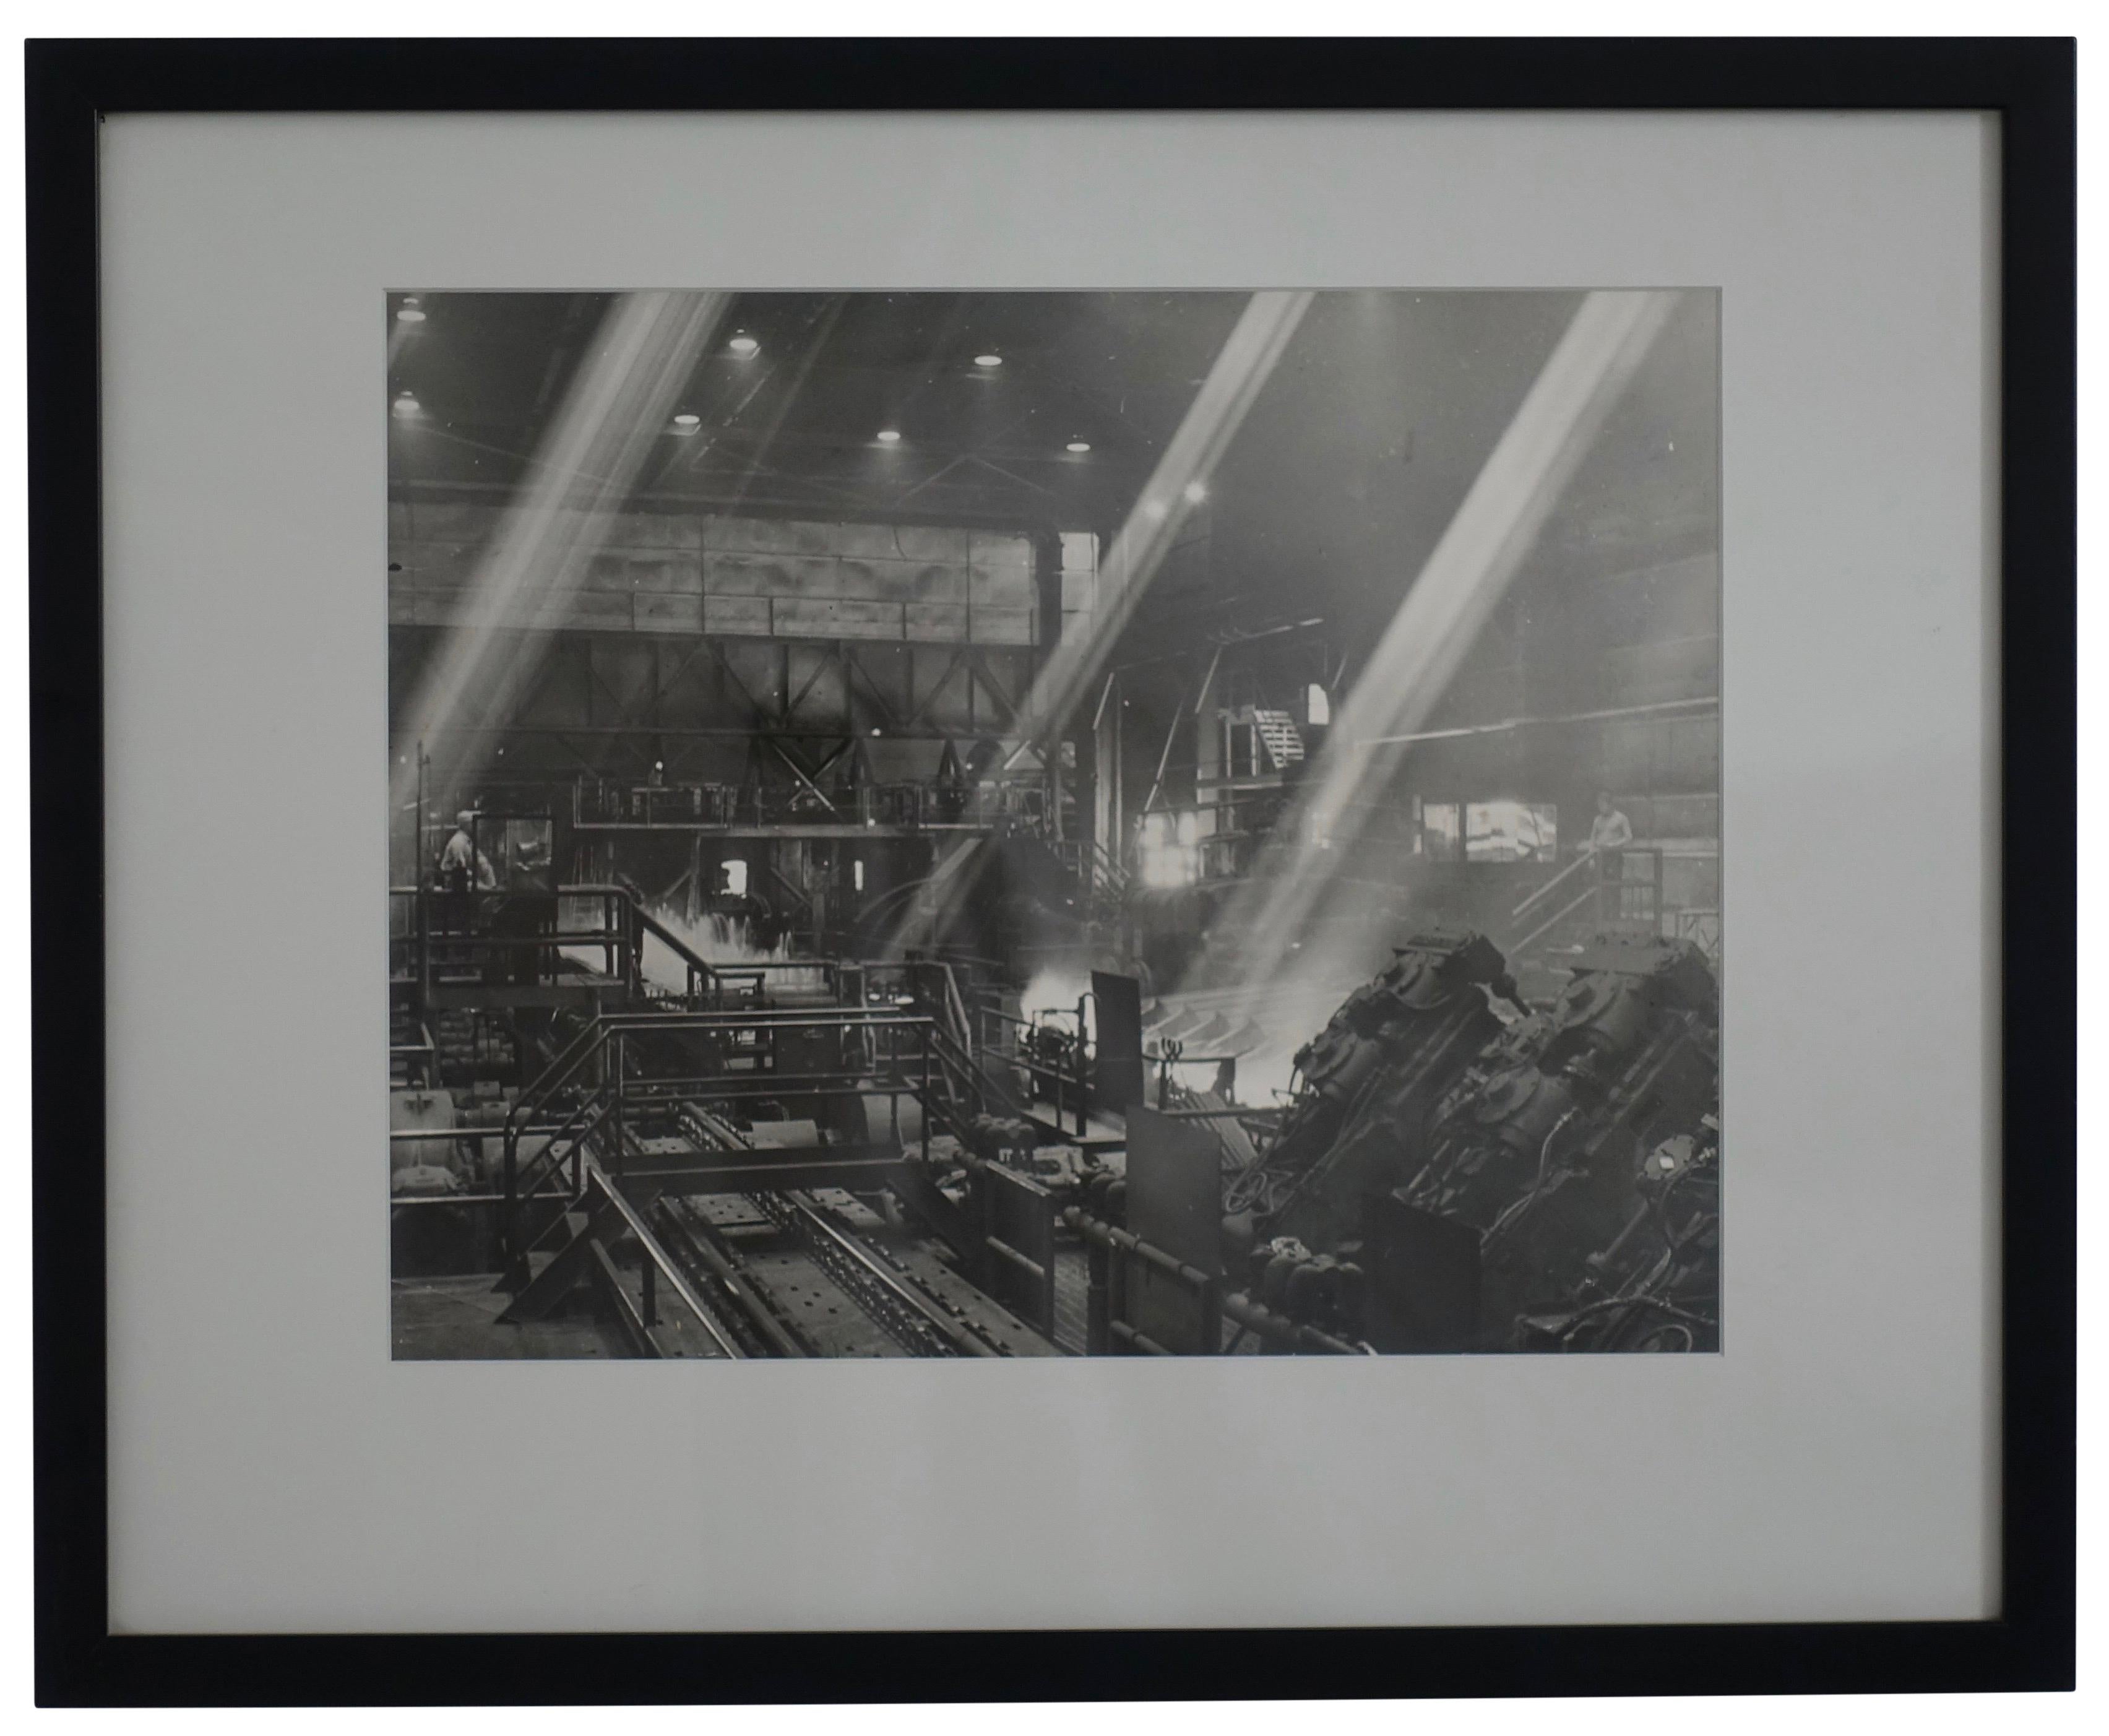 Black and white photograph of an Industrial steel mill scene. American, early to mid-20th century.
Written on the back is Louis Creveling, California.
Professionally matted and framed.
          